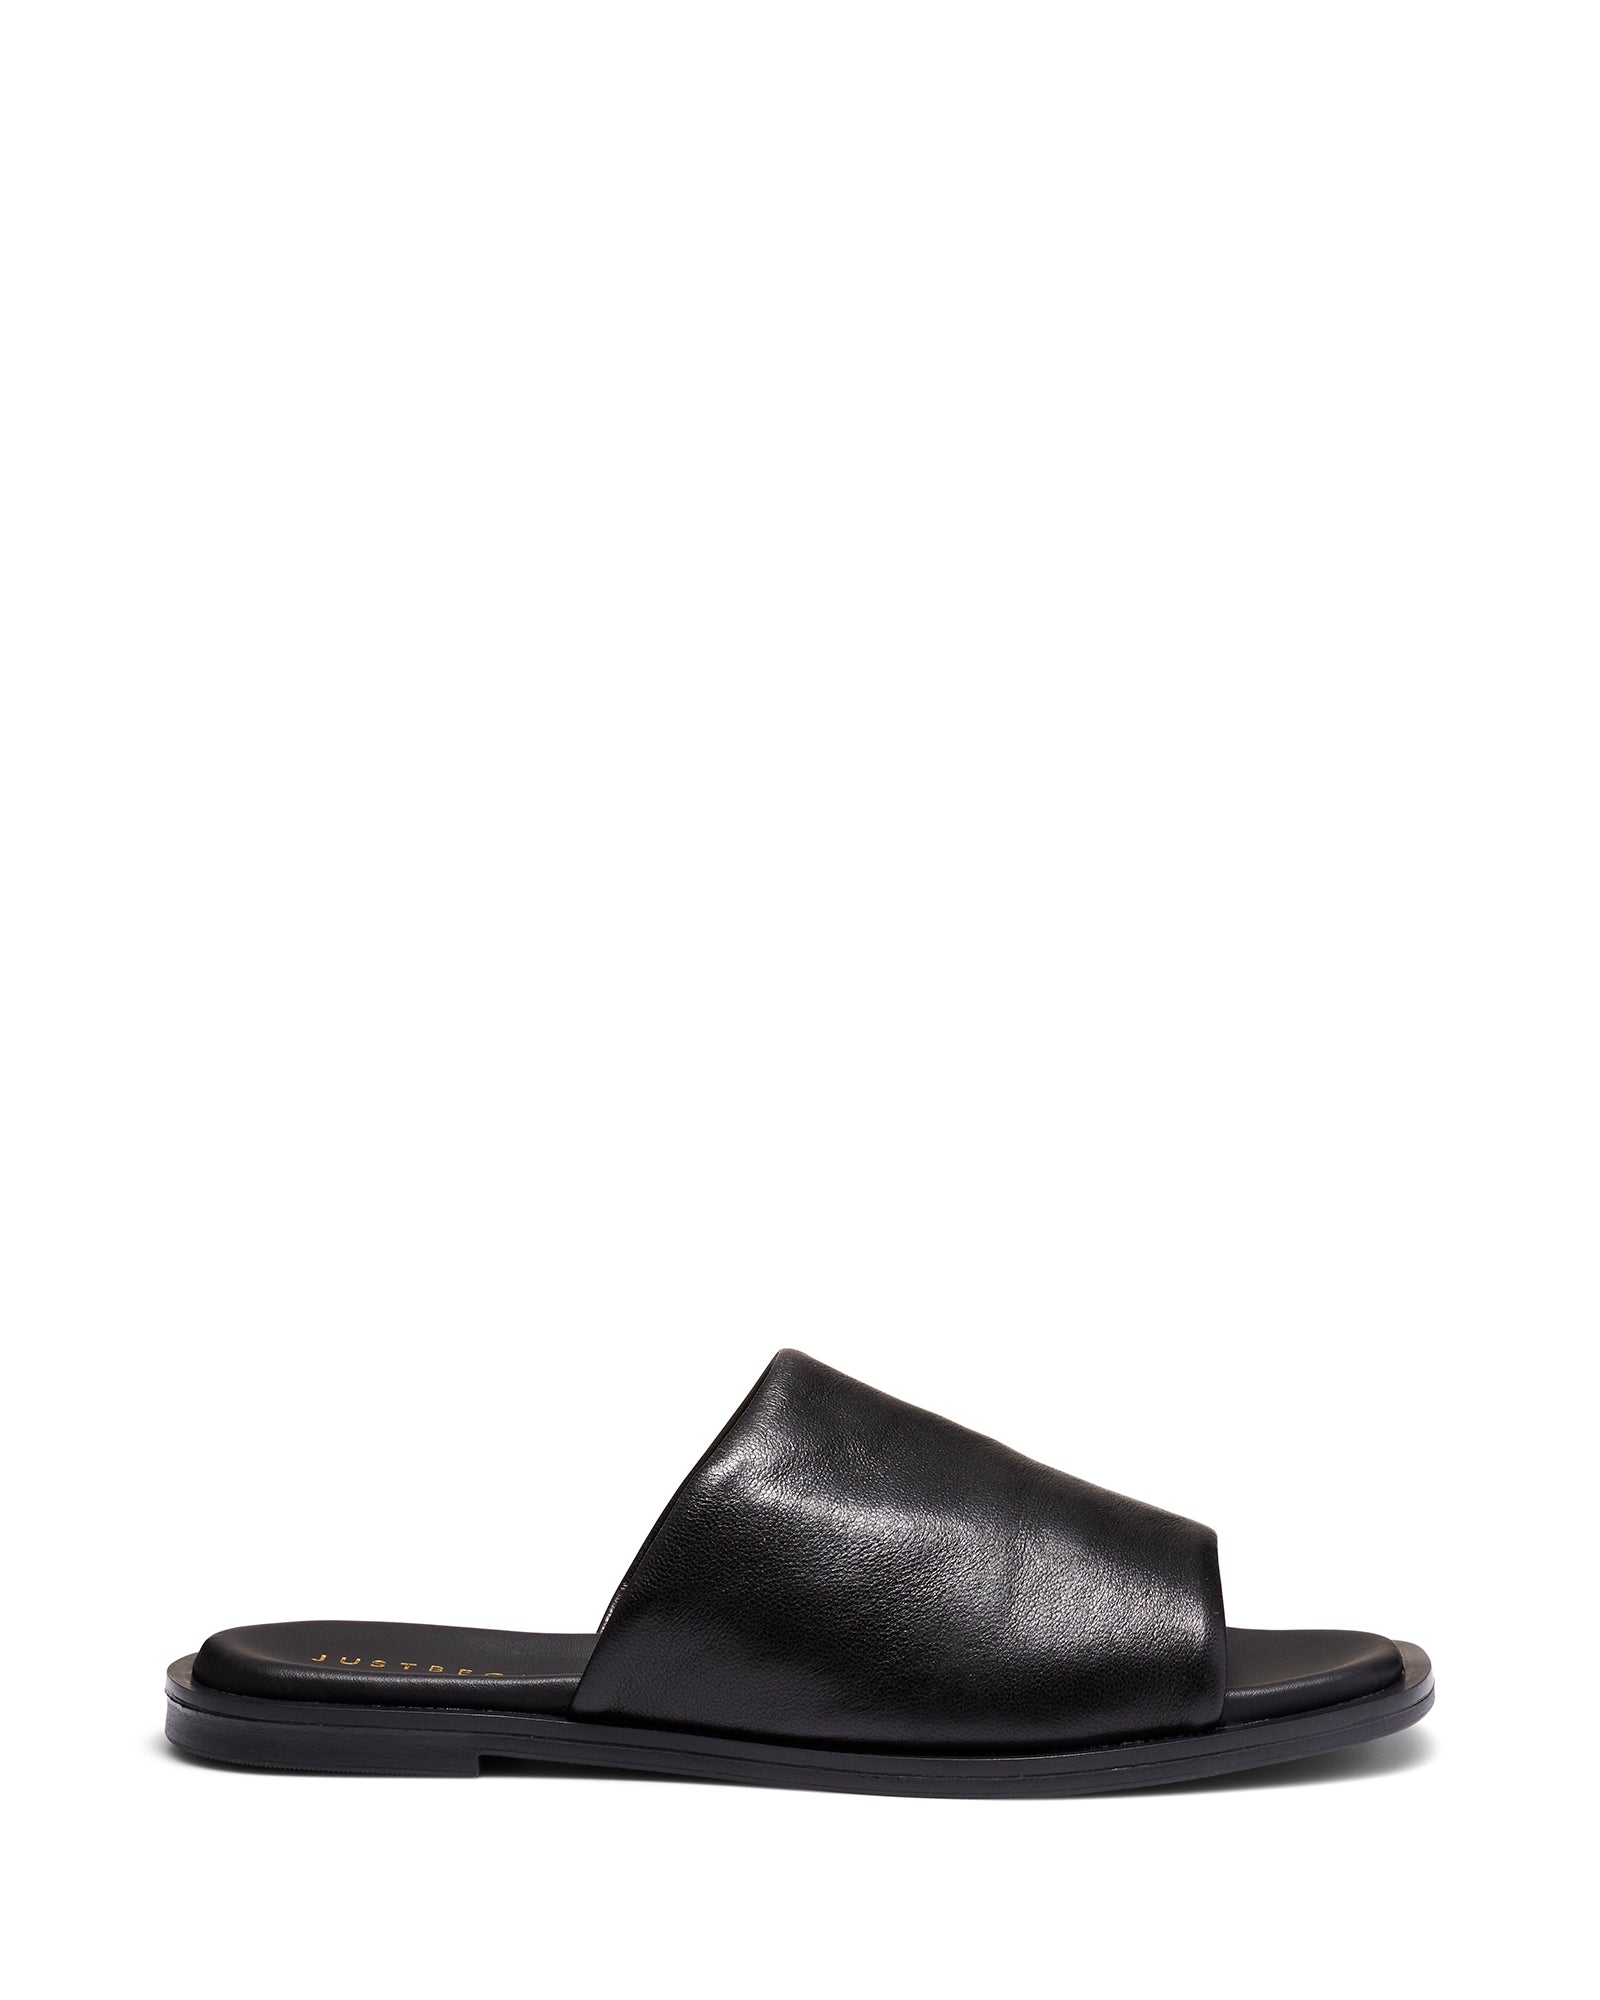 Just Because Shoes Dino Black | Leather Sandals | Slides | Flats 